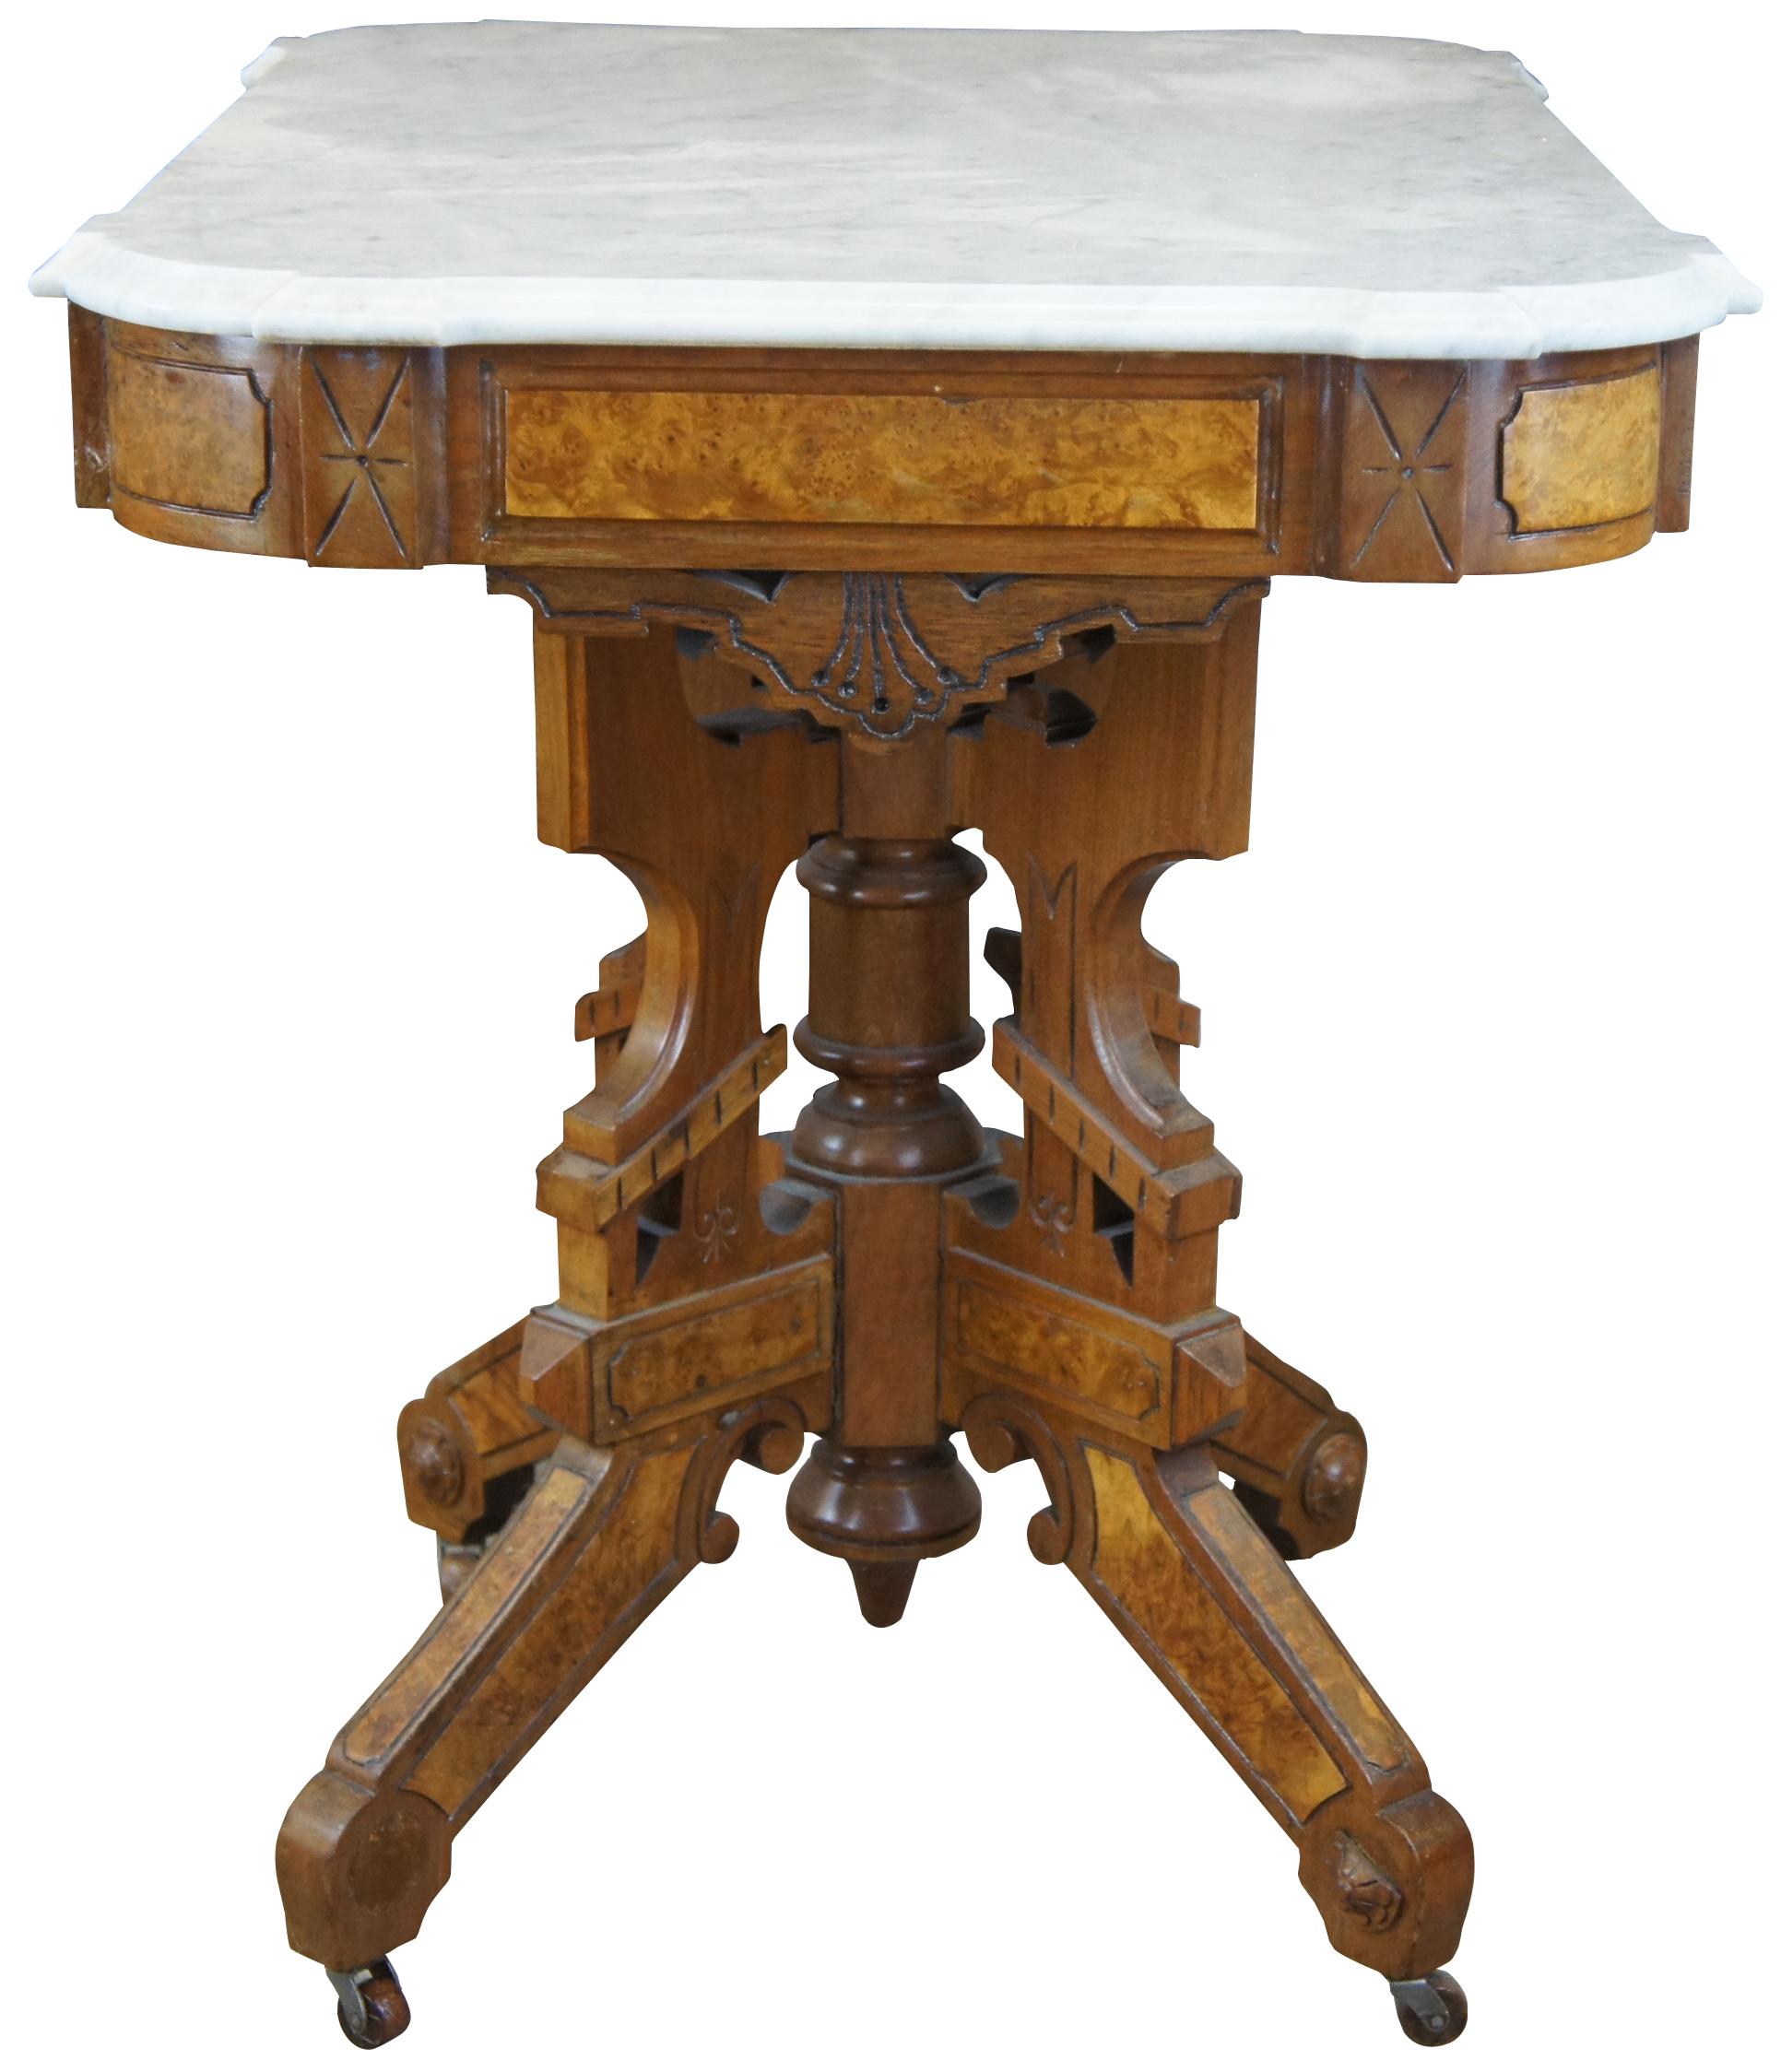 Late 19th century antique Eastlake Victorian parlor side or center table. A grande rectangular form made of walnut featuring burl accents, marble top, and a turned center support surrounded by carved panels. Measures: 34